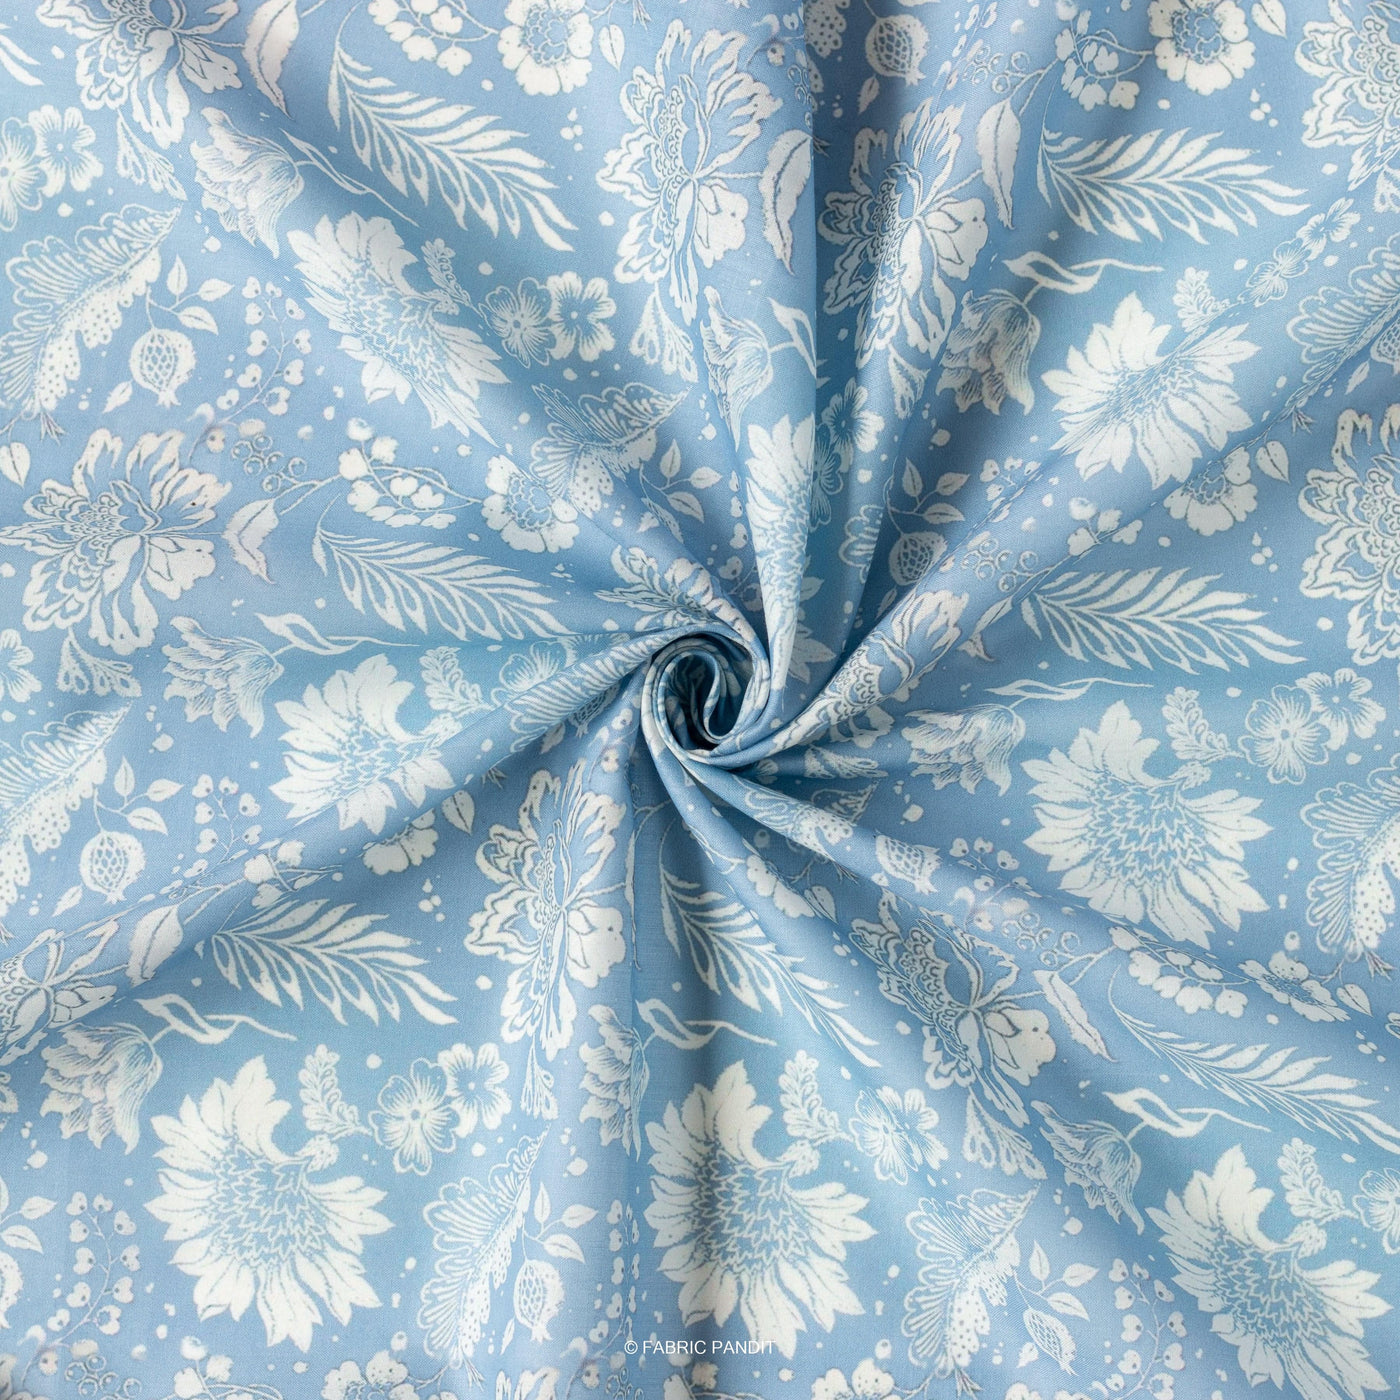 Fabric Pandit Cut Piece (CUT PIECE) Blue And White Meadow Flower Pattern Digital Printed Cambric Fabric (Width 43 Inches)